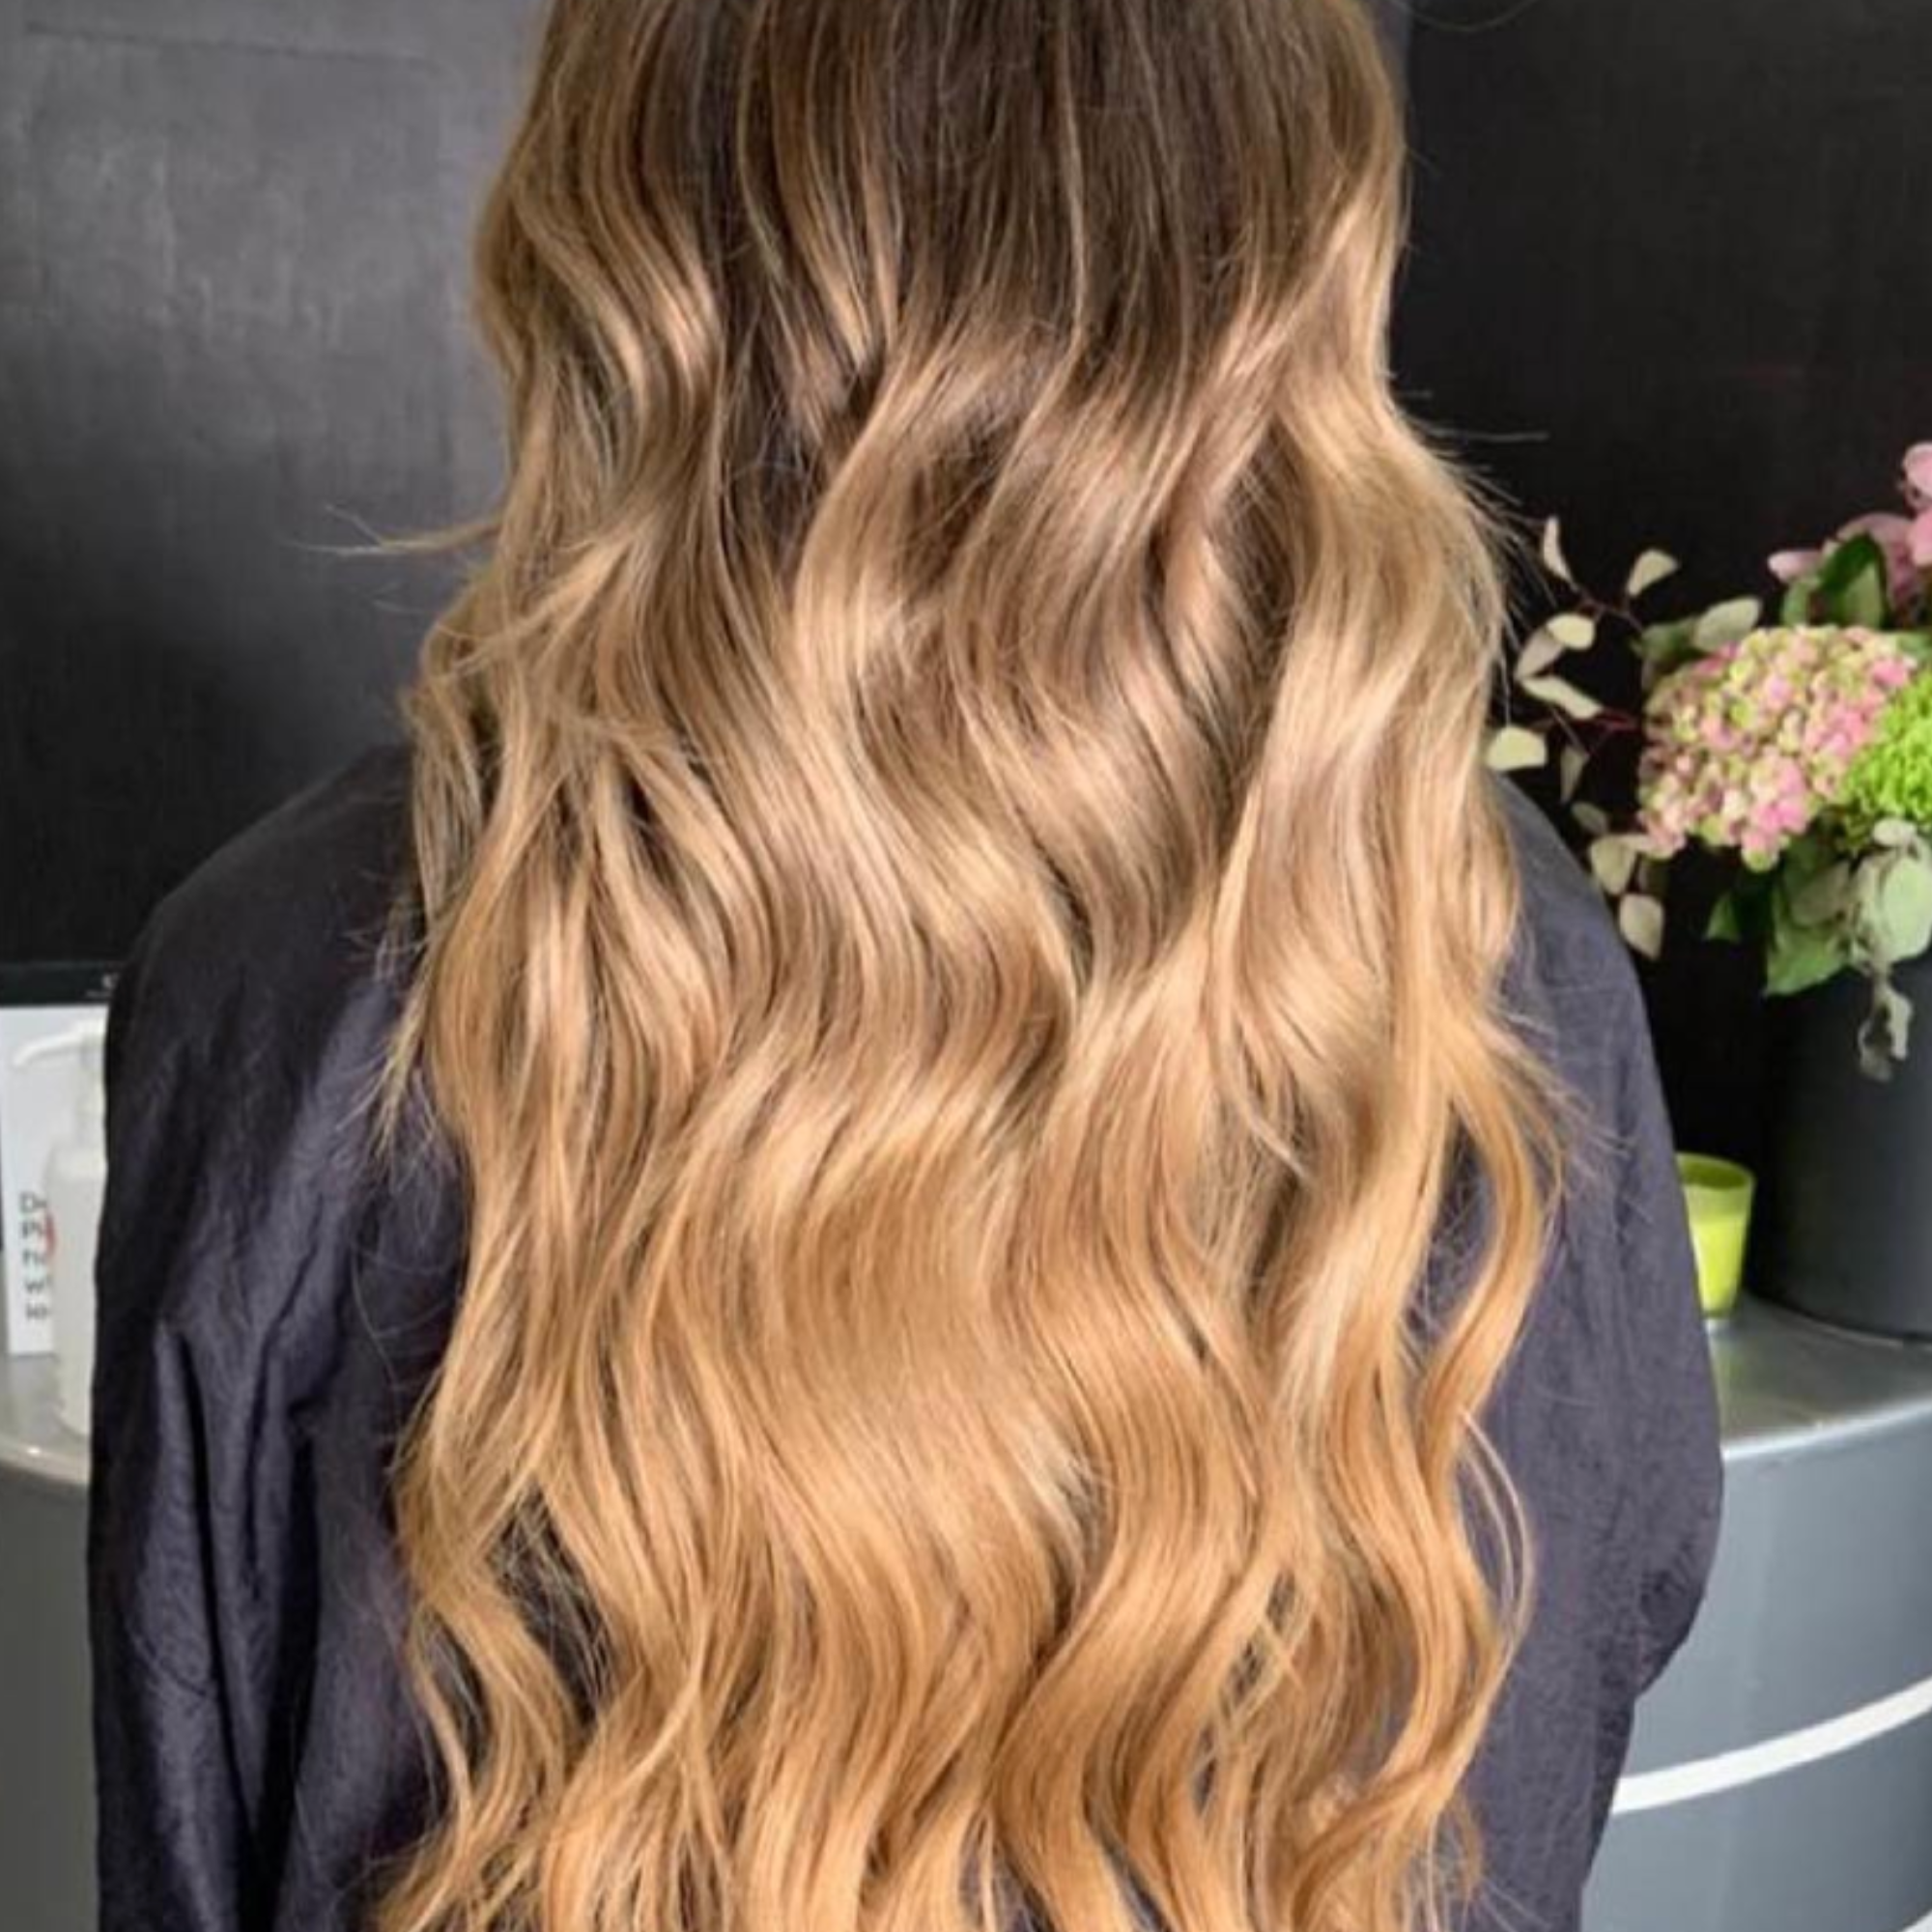 18" Invisible Tape Extensions Rooted Boho